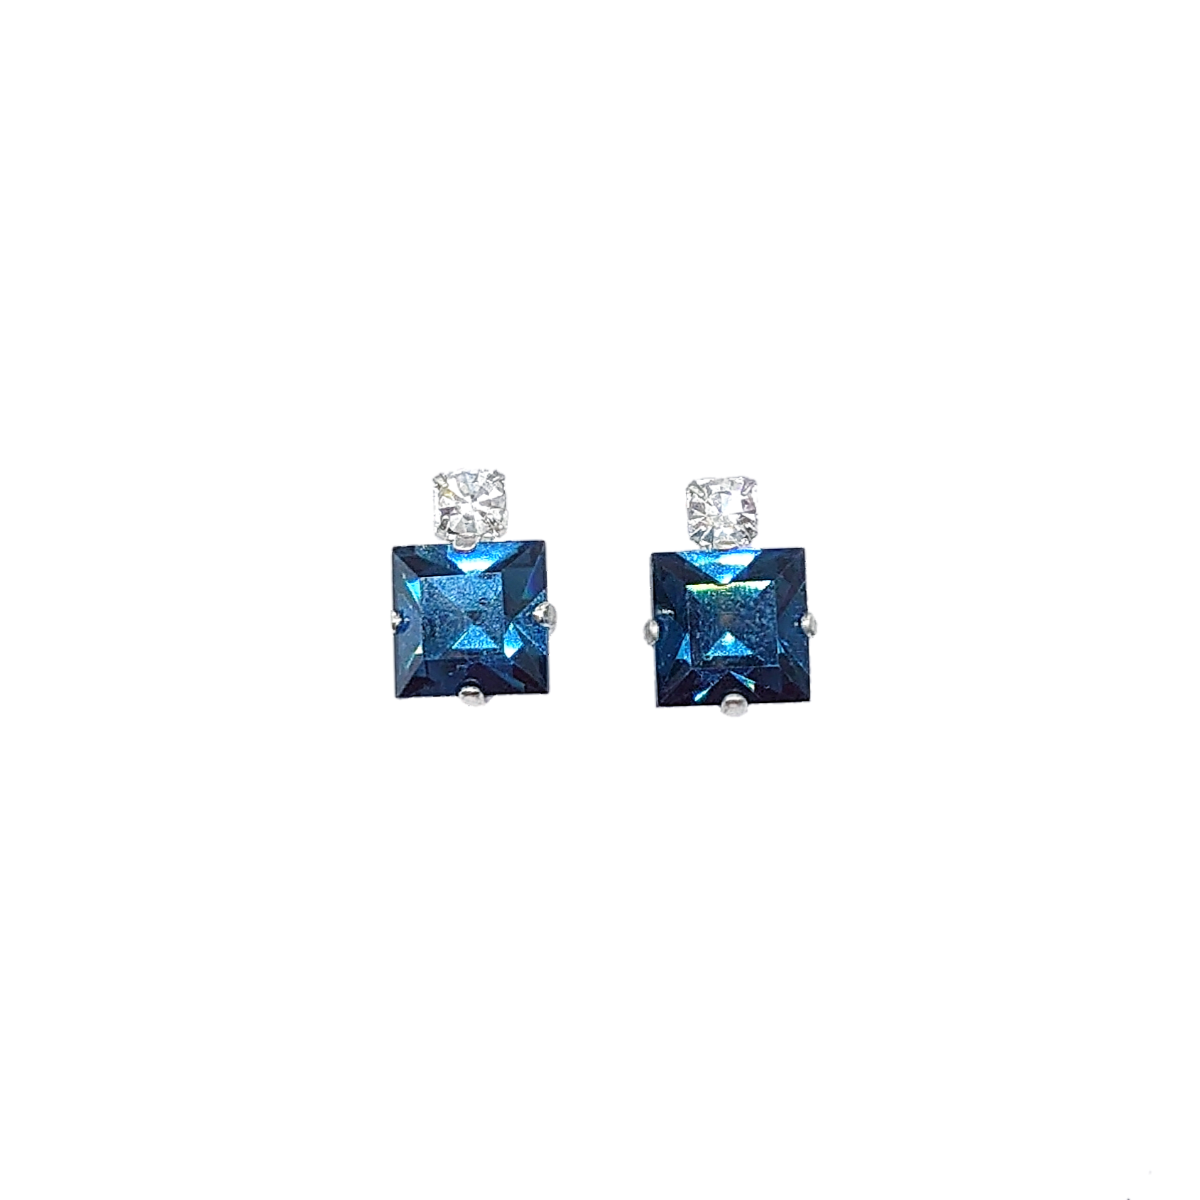 Small Swarovski Crystals Square Earrings With Silver Fittings